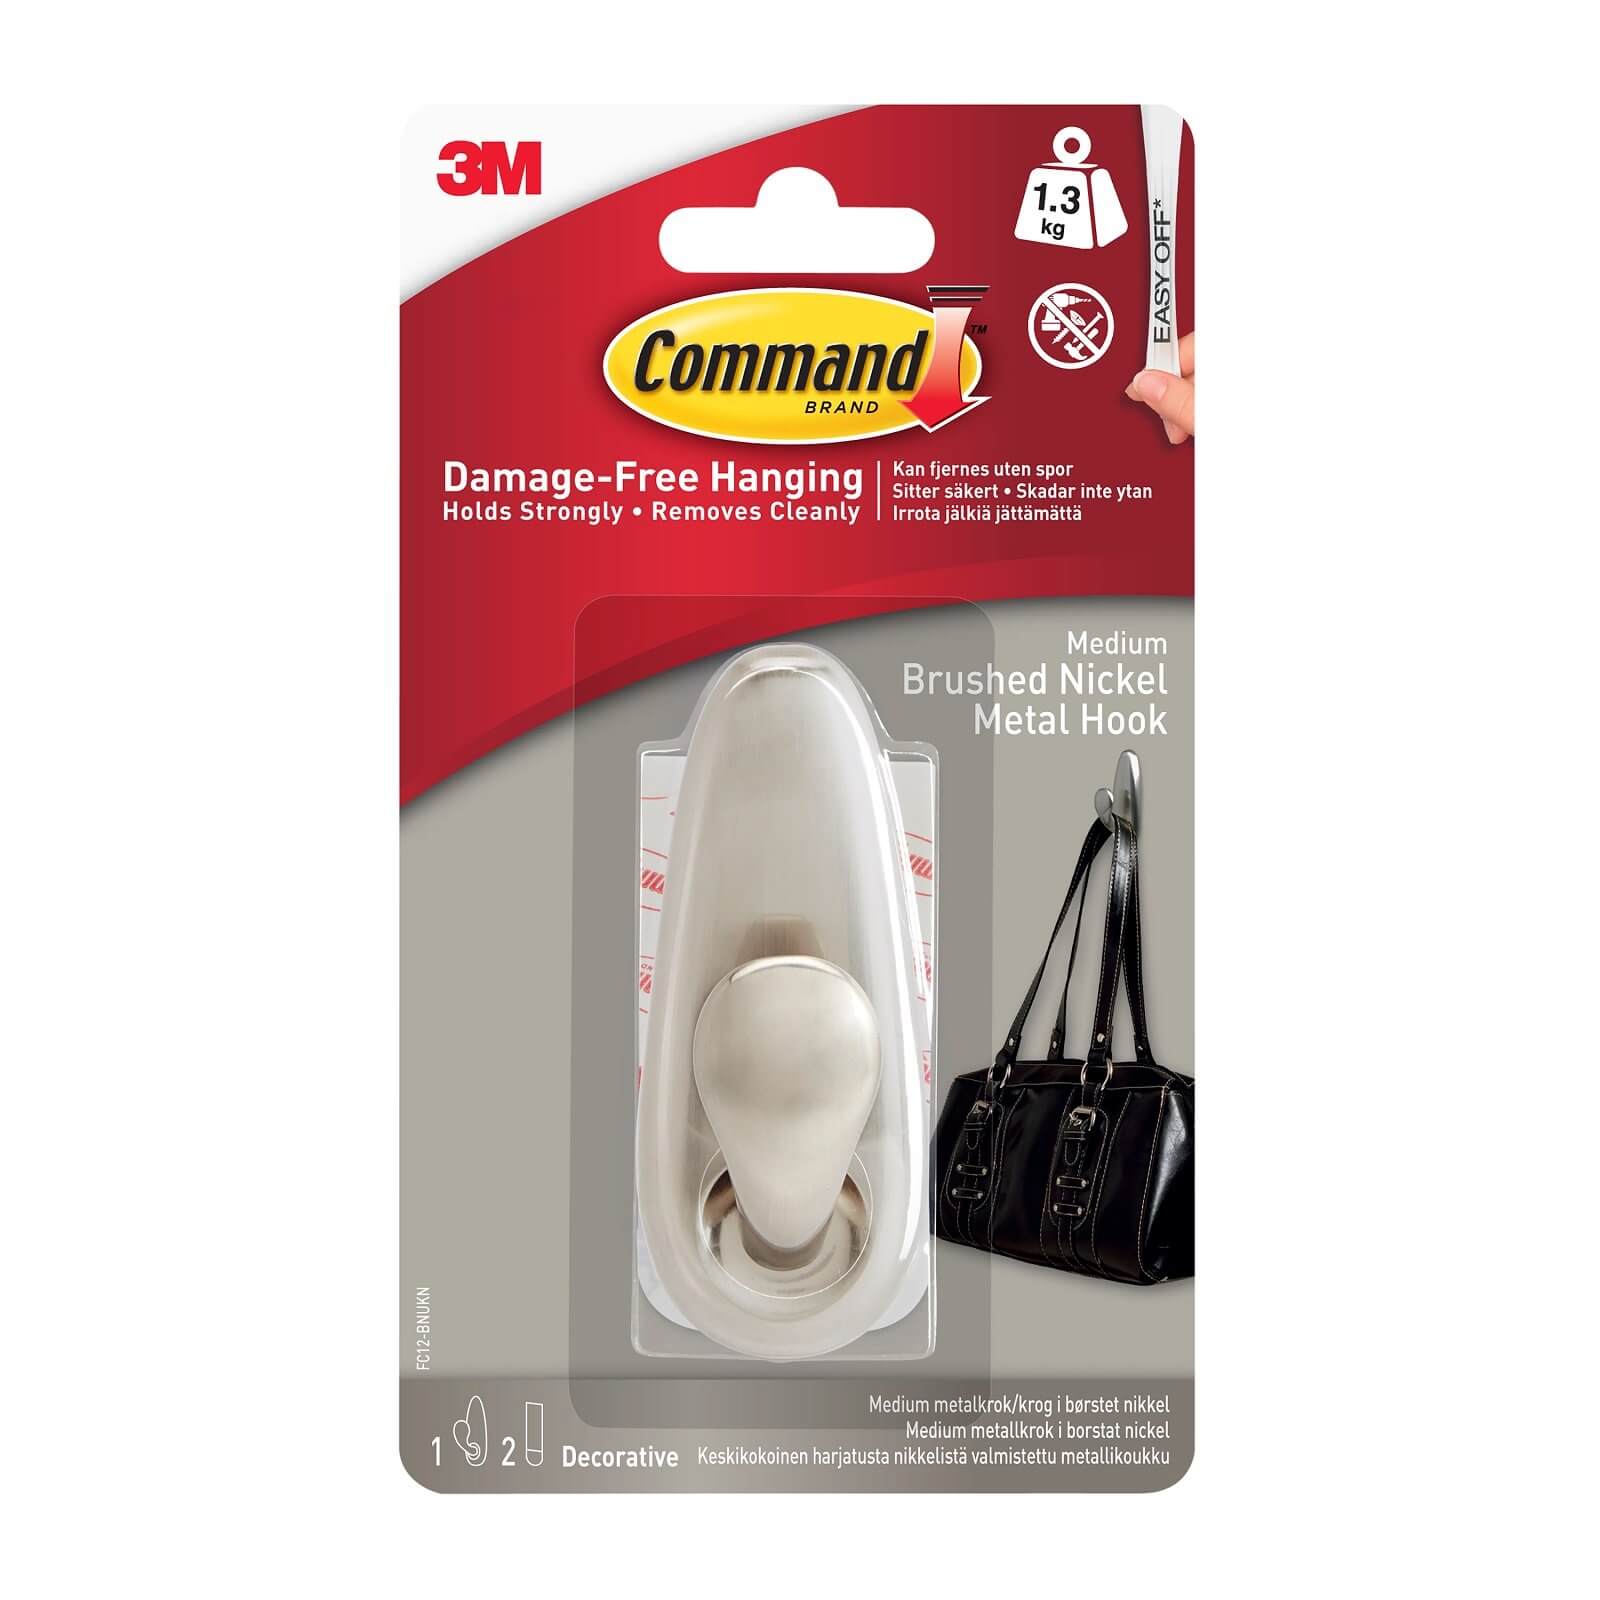 Command Forever Classic Large Metal Wall Hooks, Damage Free Hanging Wall  Hooks with Adhesive Strips, No Tools Wall Hooks for Hanging Decorations in